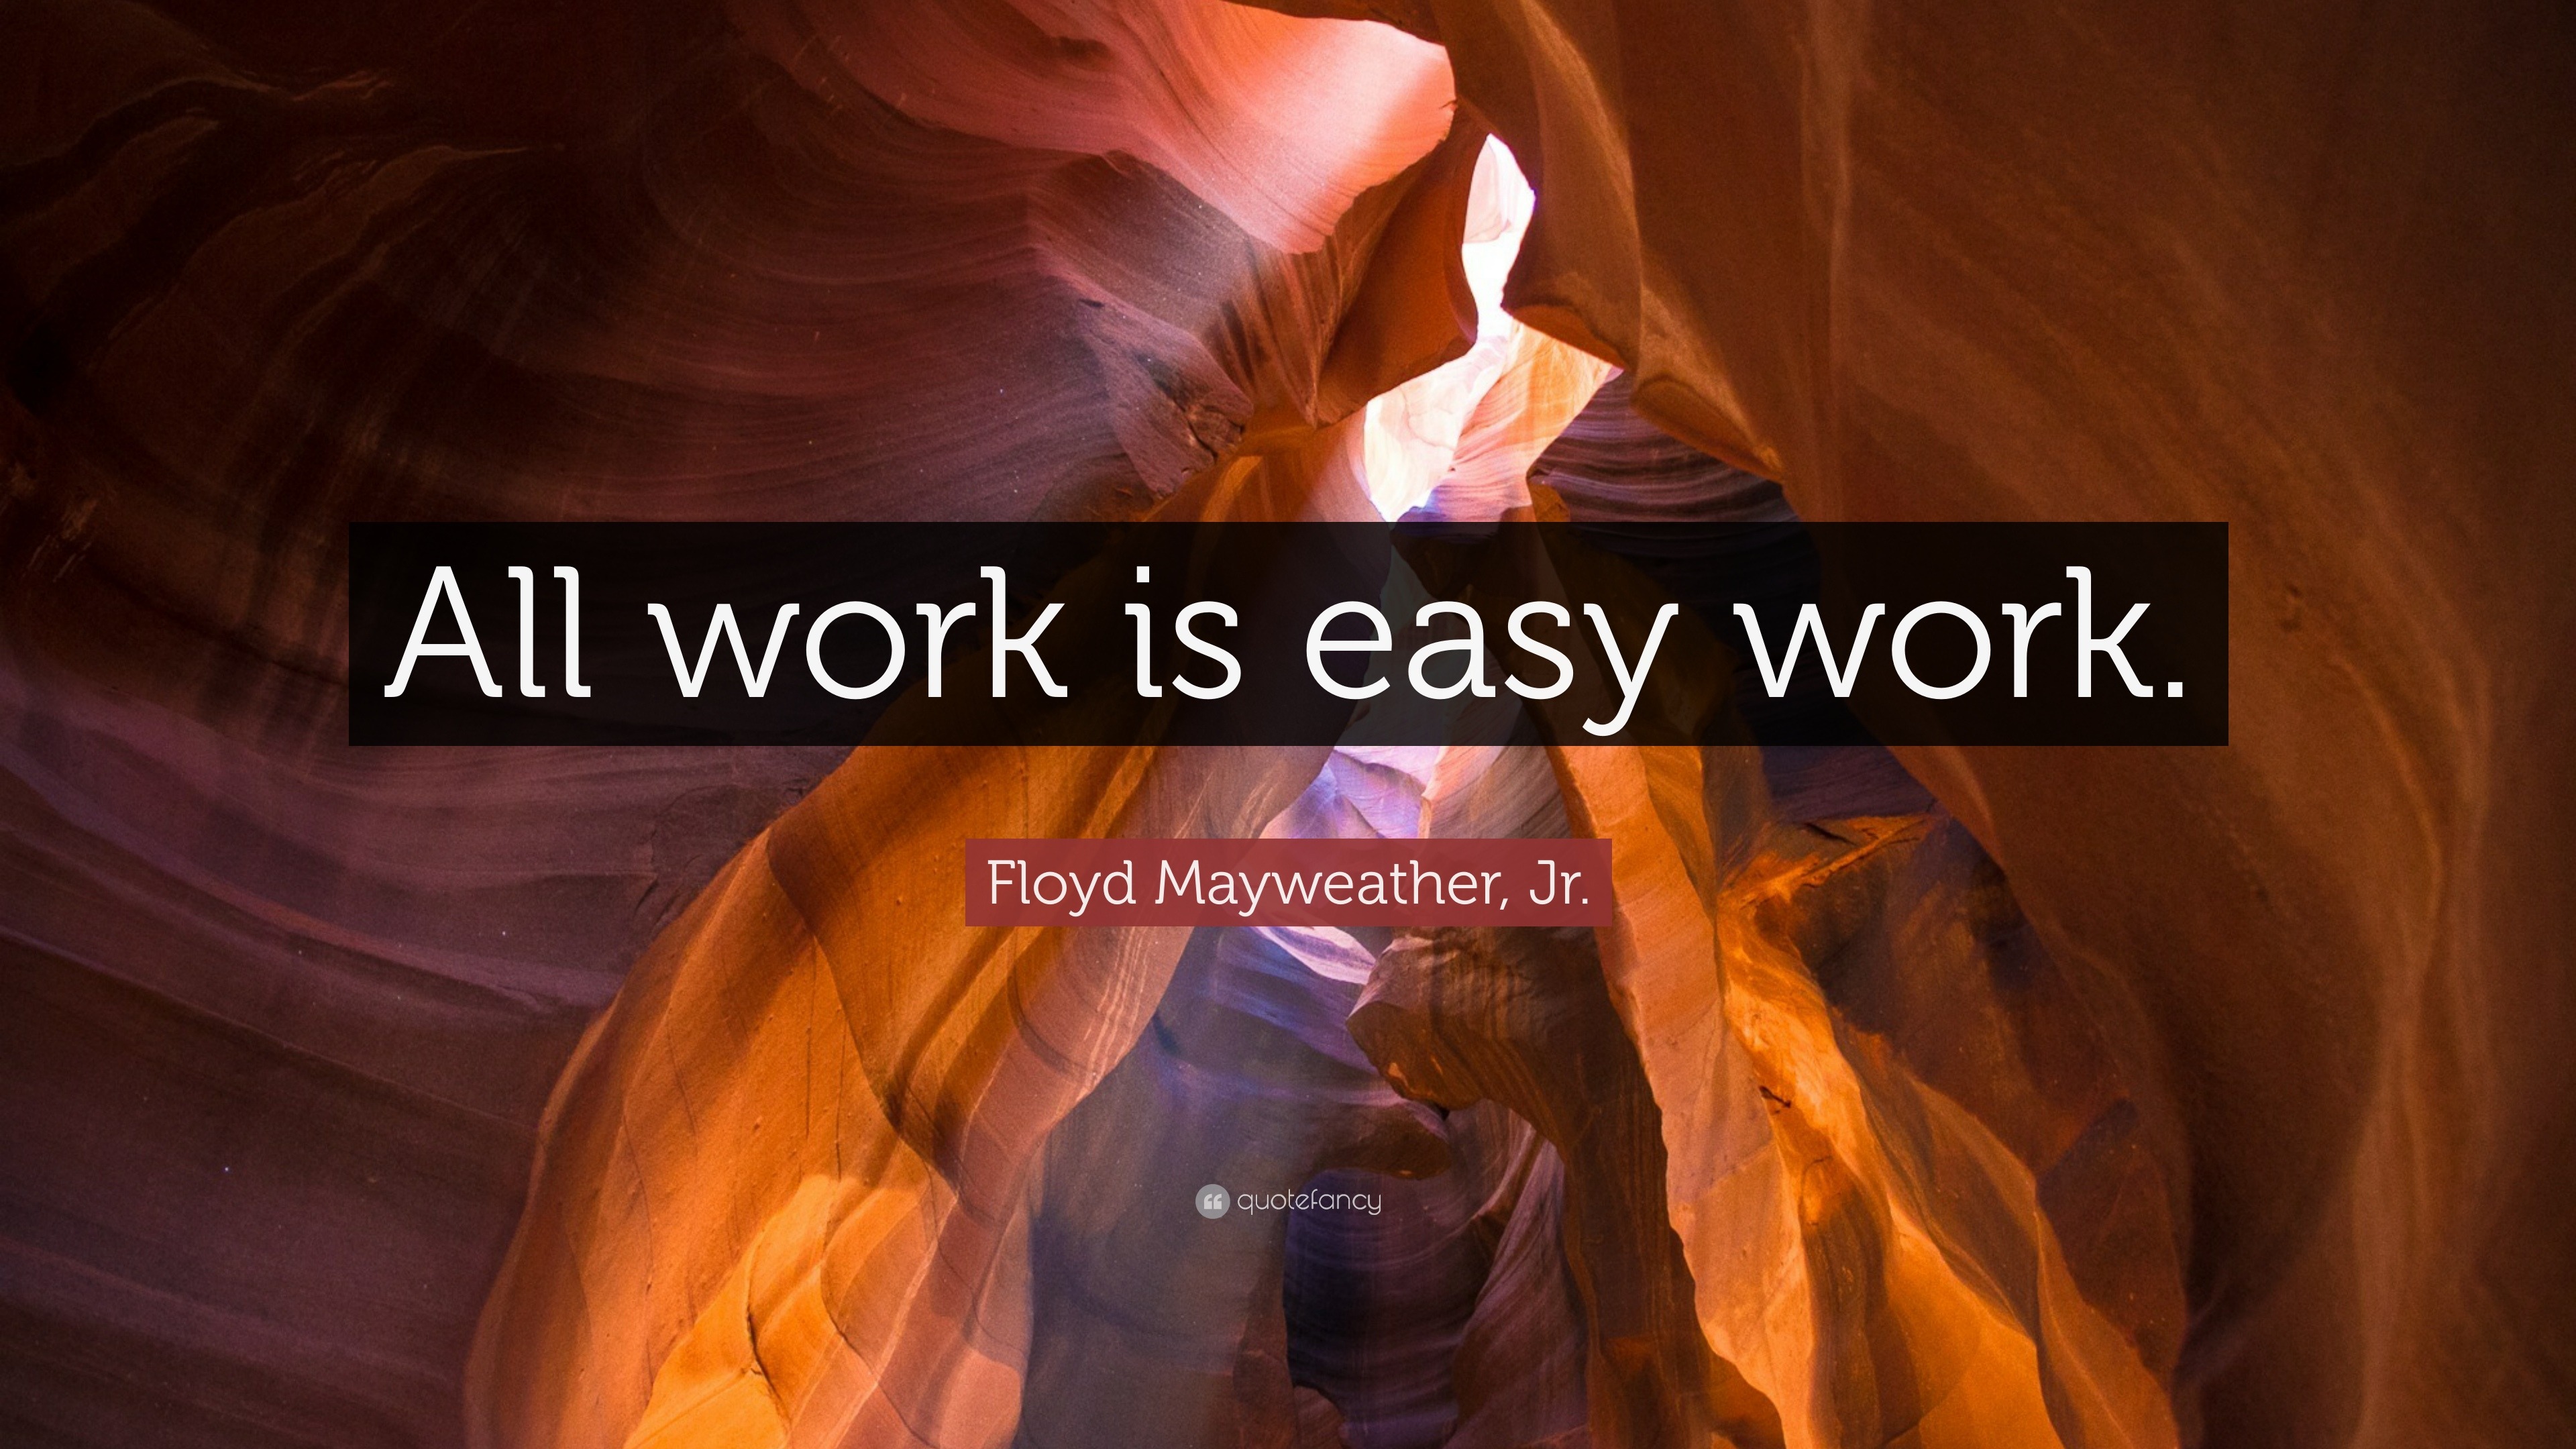 Floyd Mayweather, Jr. Quote: “All work is easy work.”